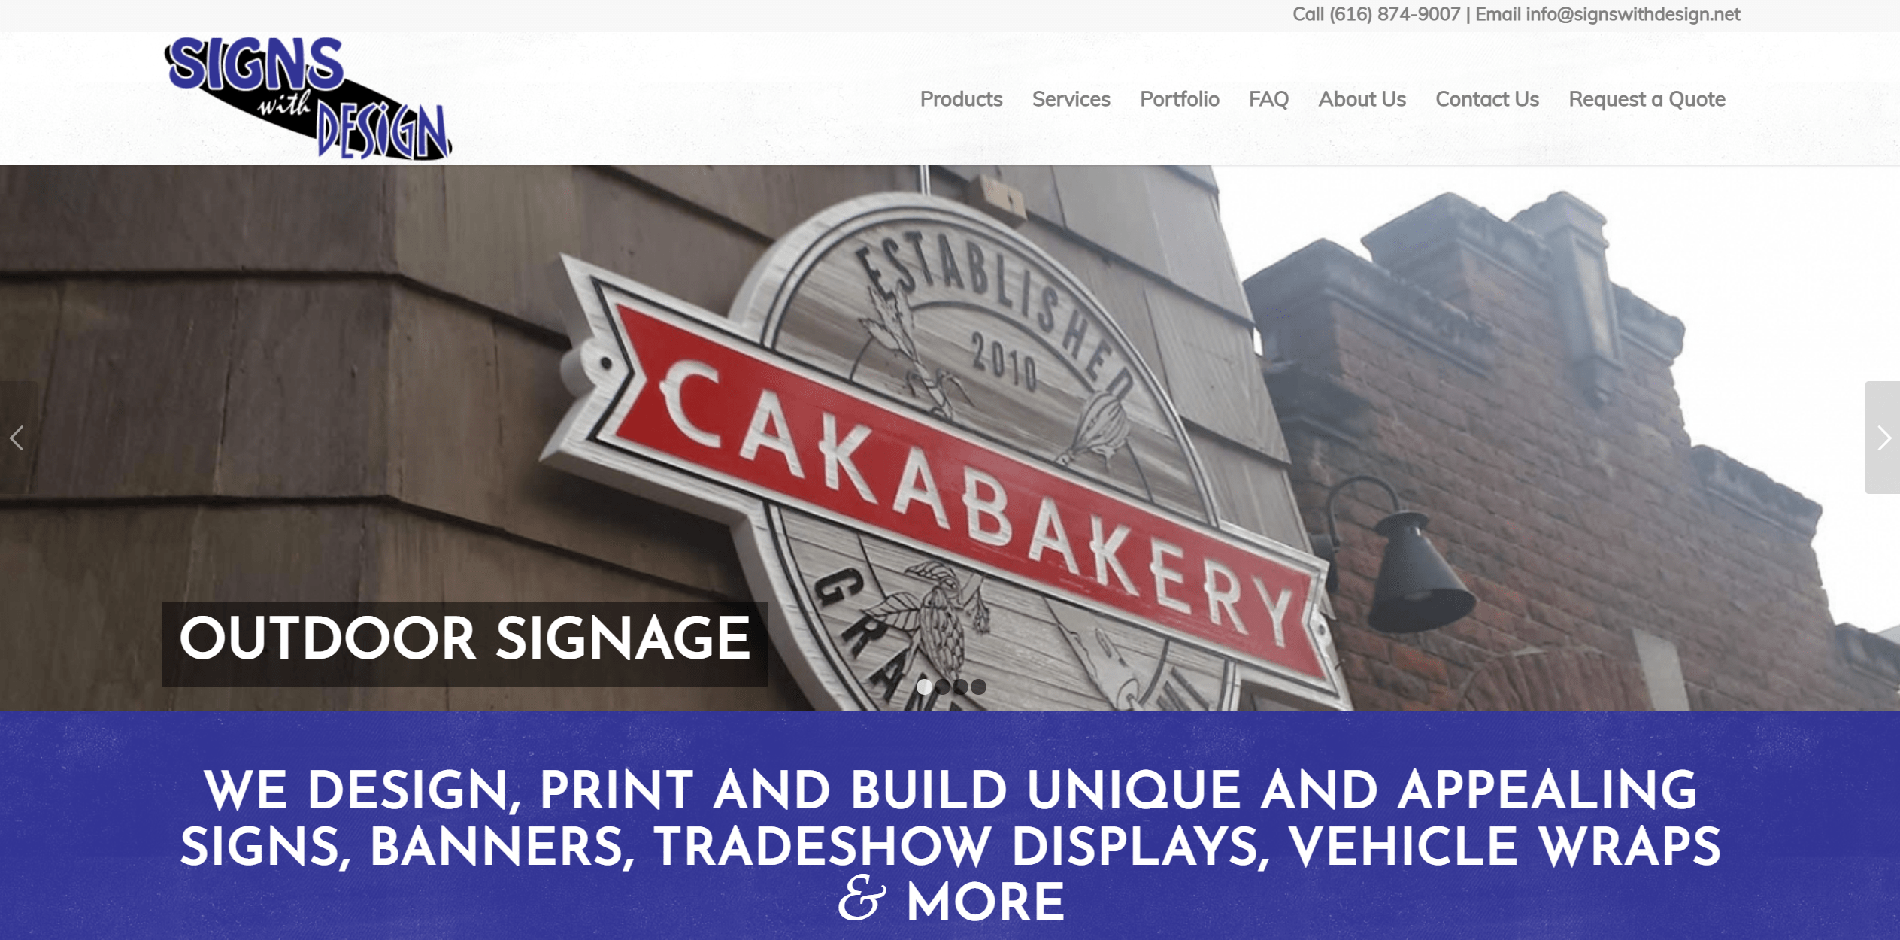 Website Redesign for Signs with Design, a Collaboration with Moxie Men, Inc - Purple-Gen.com